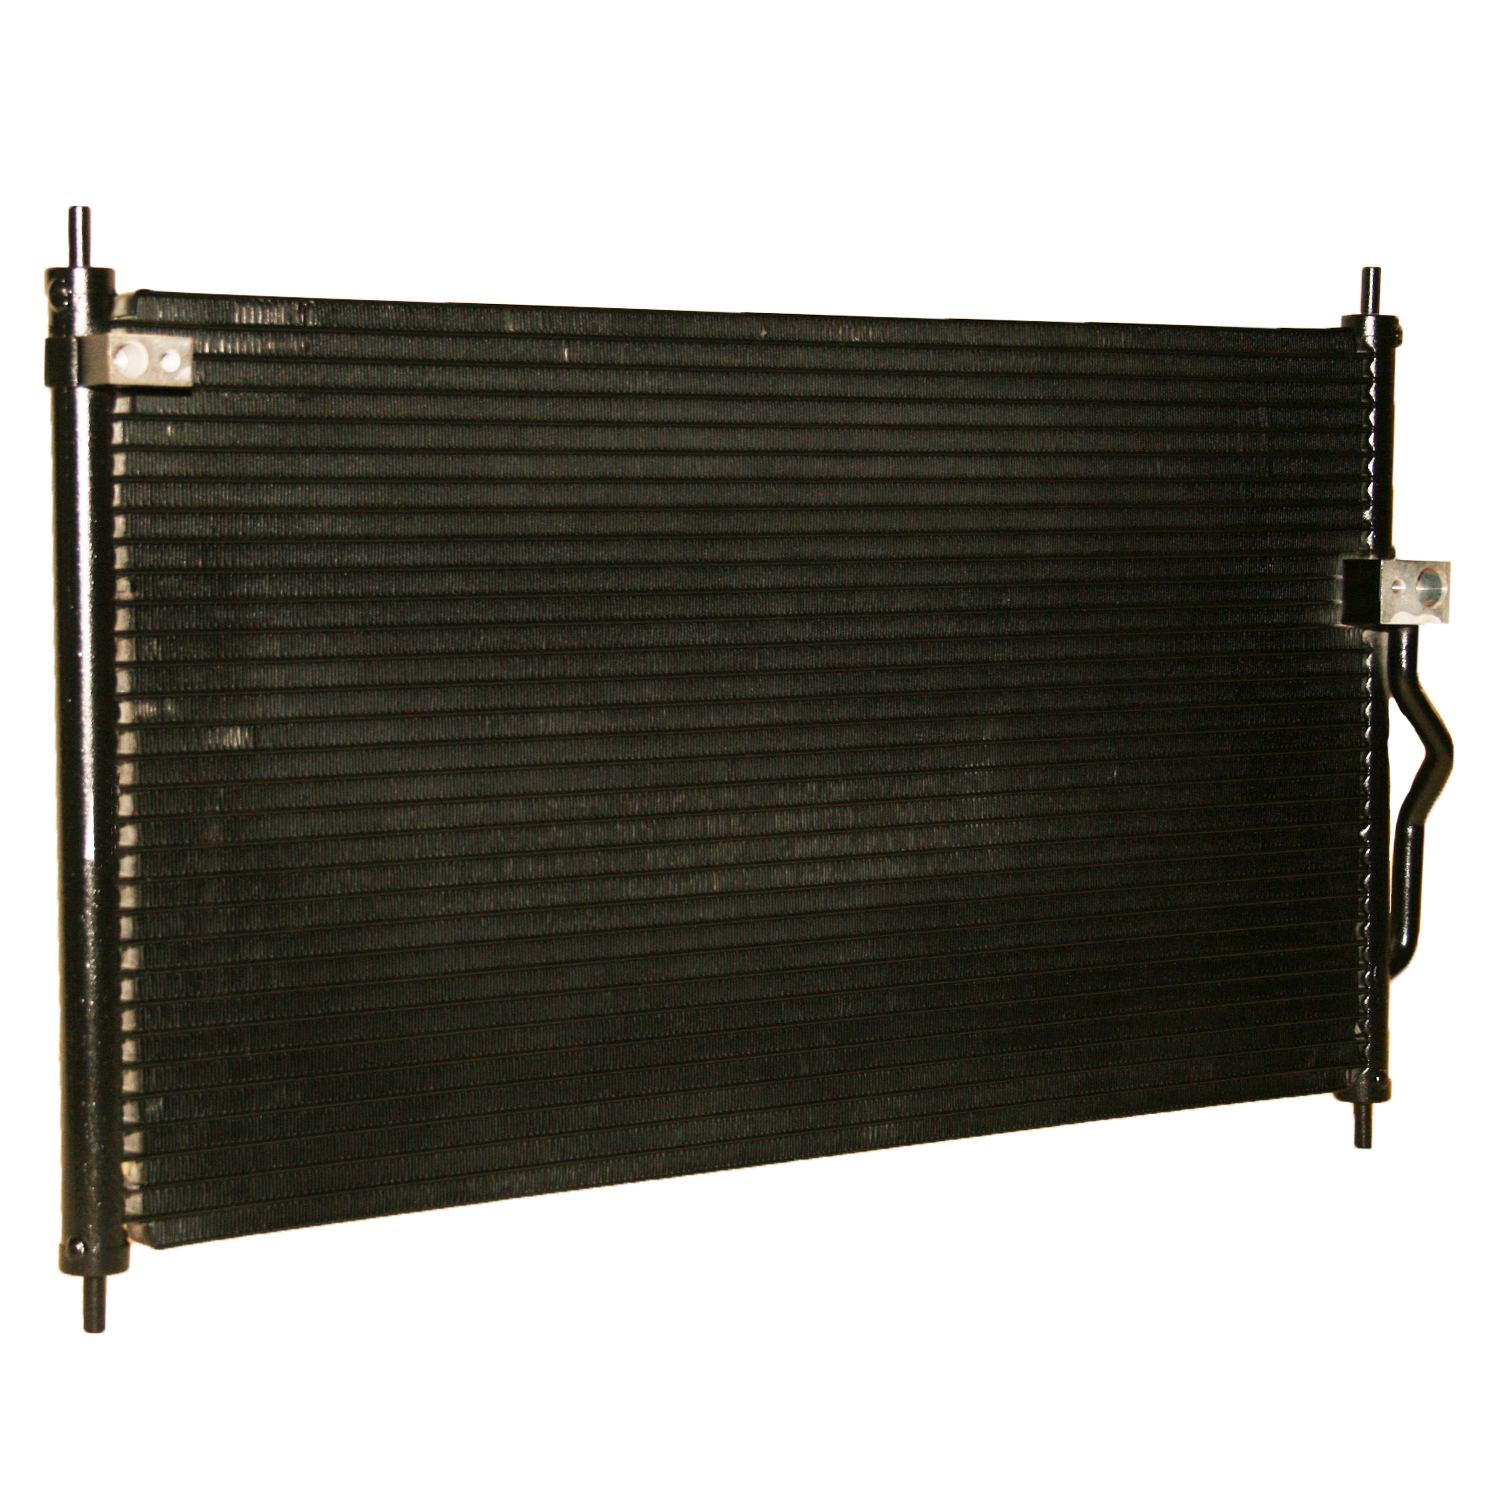 TCW Condenser 44-4562 New Product Image field_60b6a13a6e67c